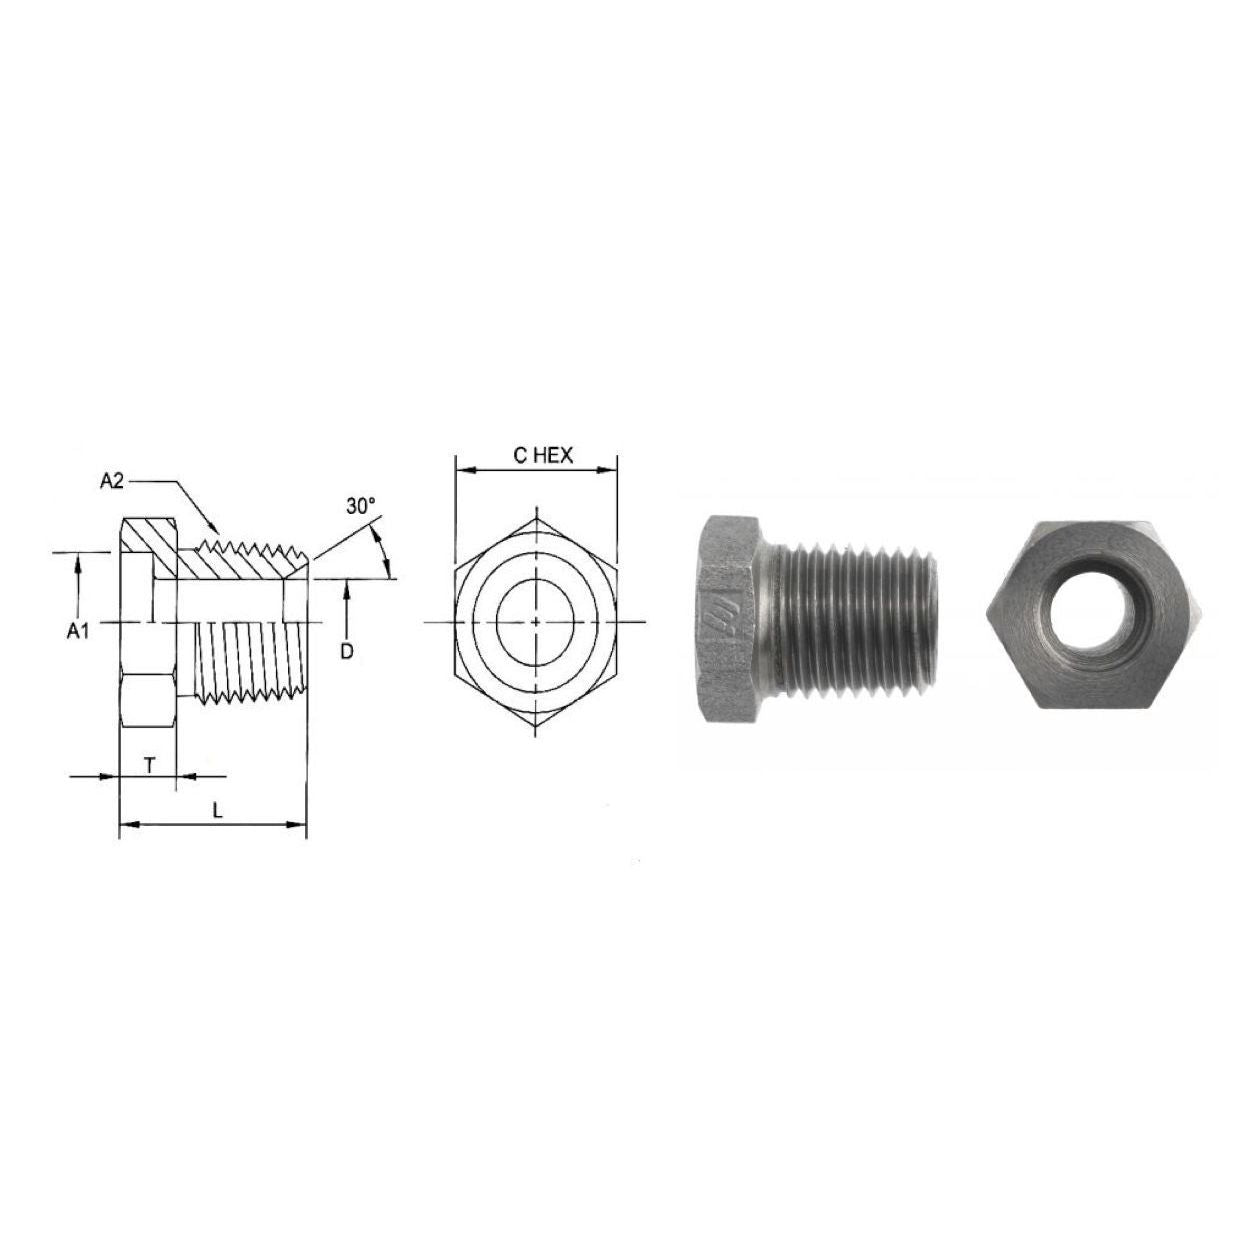 0404-24-24-SS : OneHydraulics 1.5 (1-1/2) Bore x 1.5 (1-1/2)  Male NPT Straight Plug, Stainless Steel